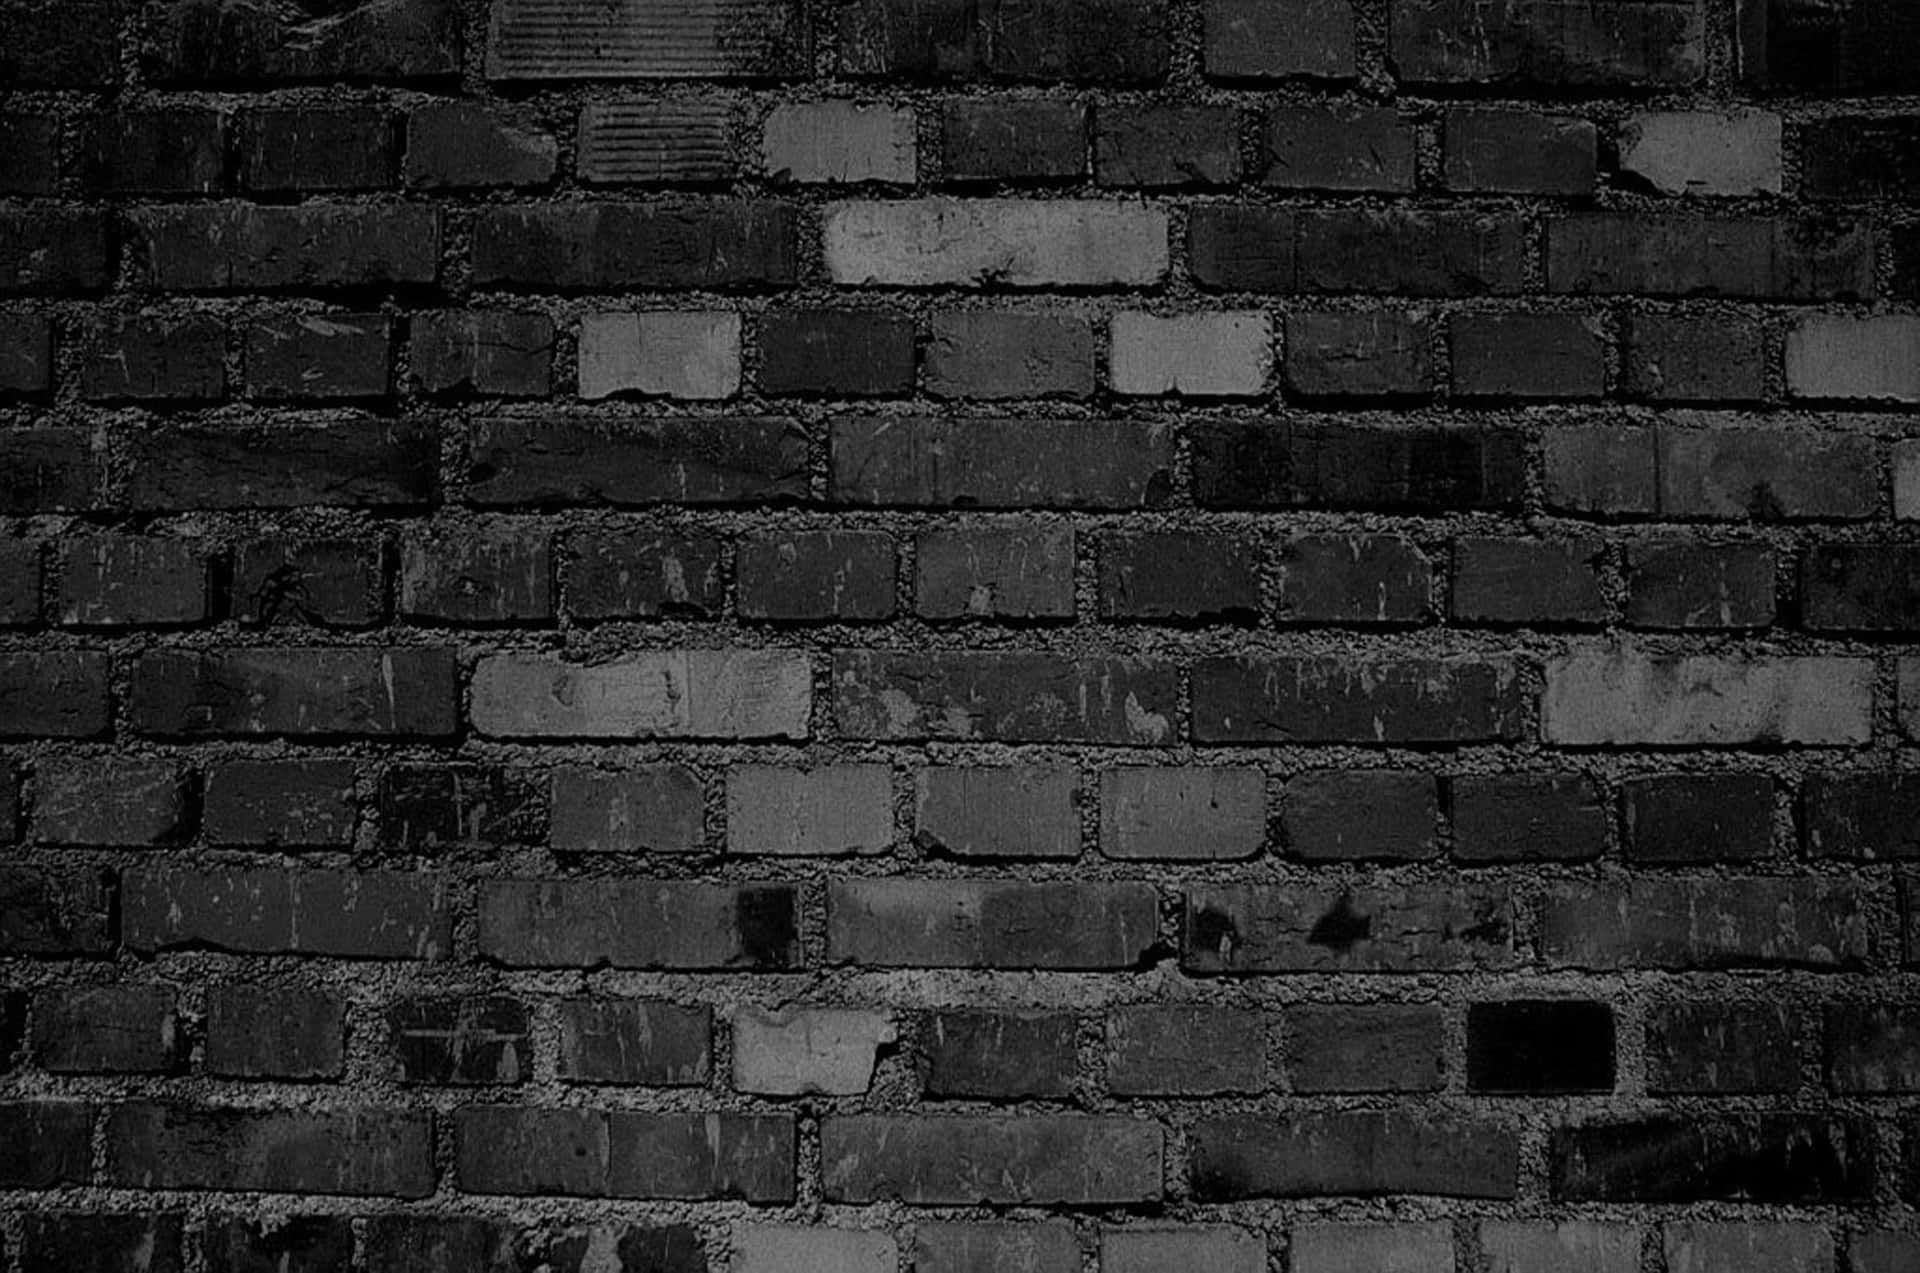 A Brick Wall In Black And White